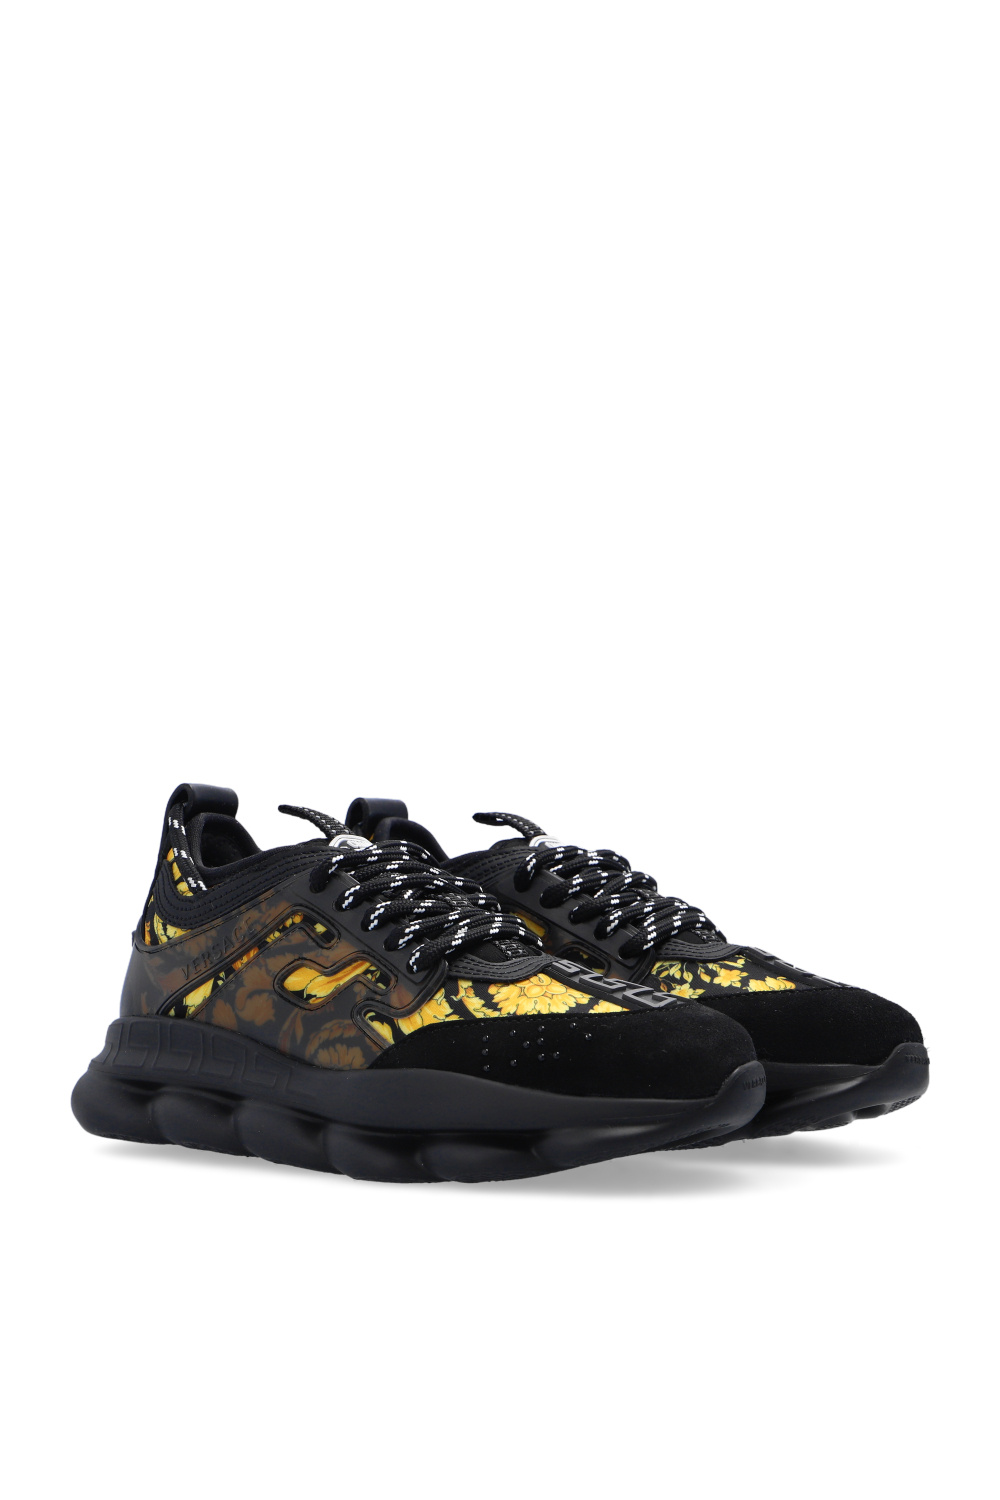 Sneakers luxe homme - Sneakers Versace Chain Reaction black and